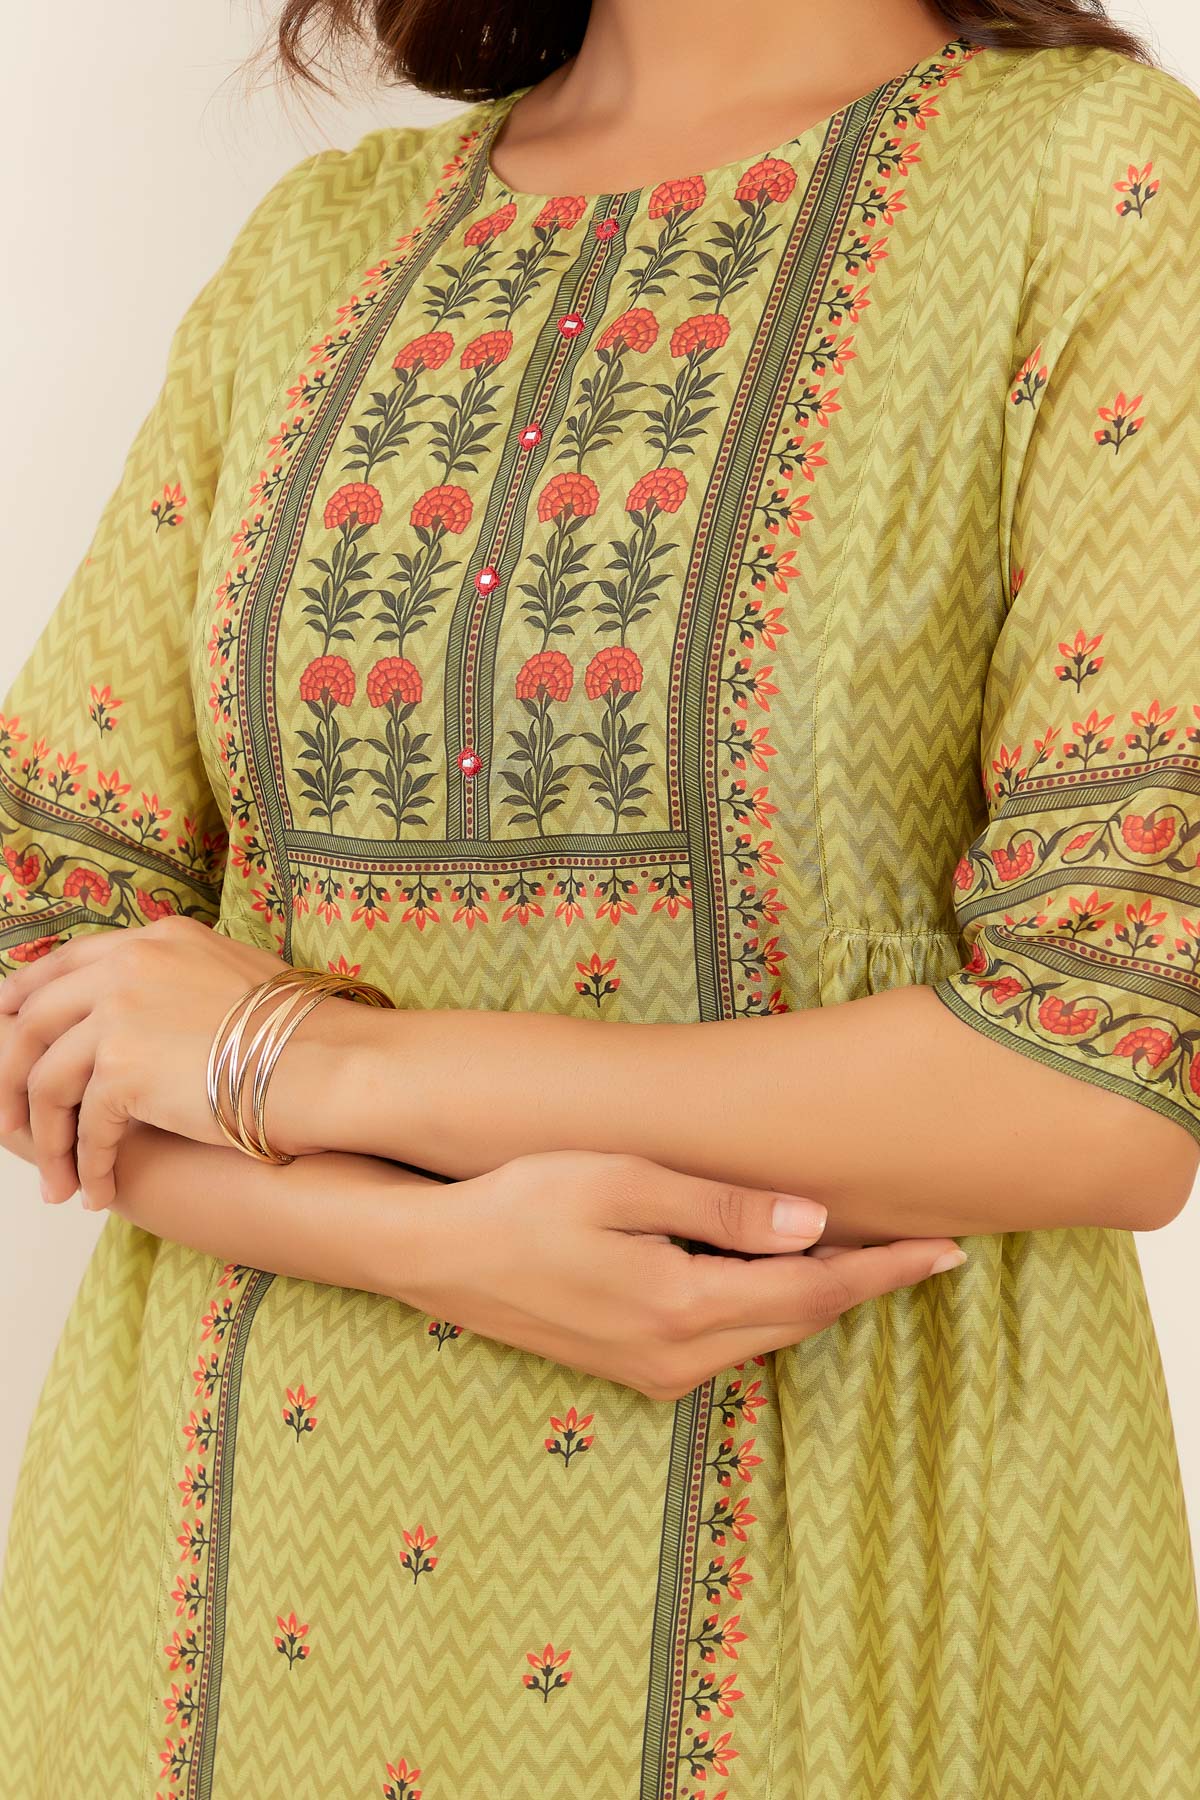 All Over Geometric & Floral Printed A-Line Pleated Kurta - Green